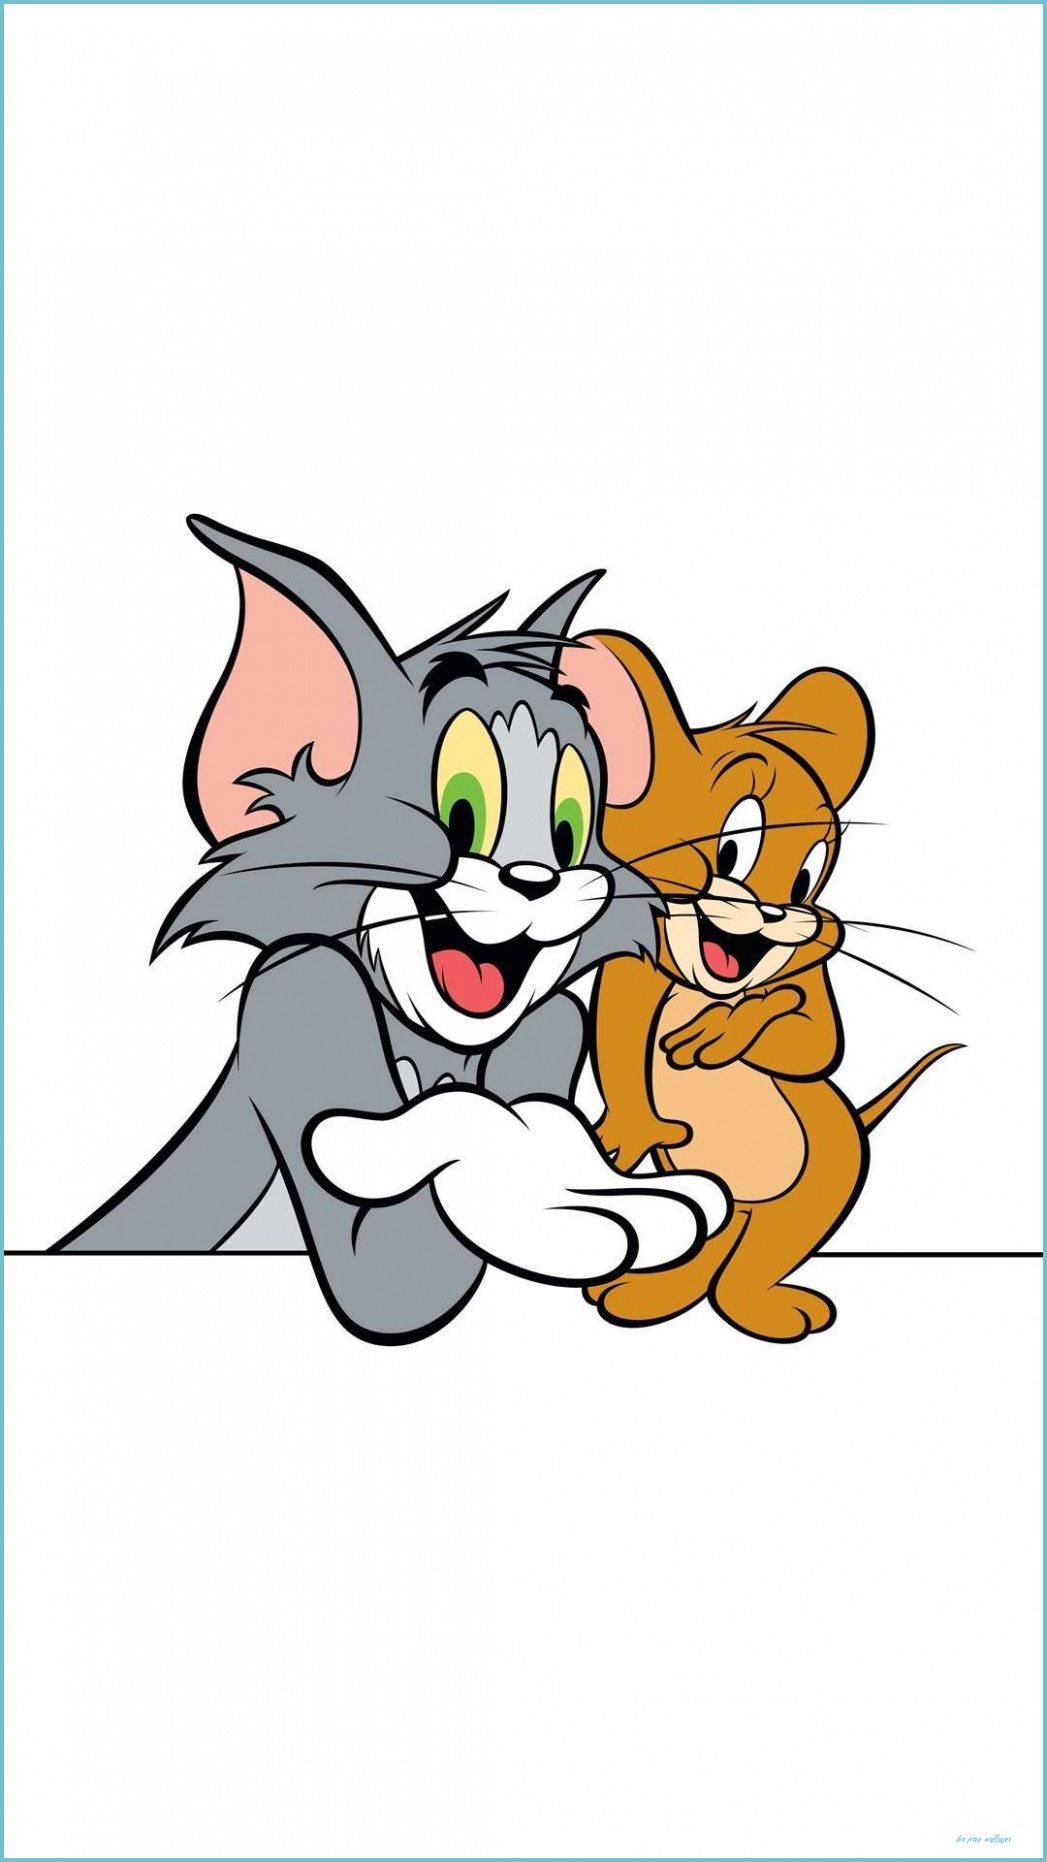 Tom And Jerry IPhone Wallpaper: Image Jerry Wallpaper